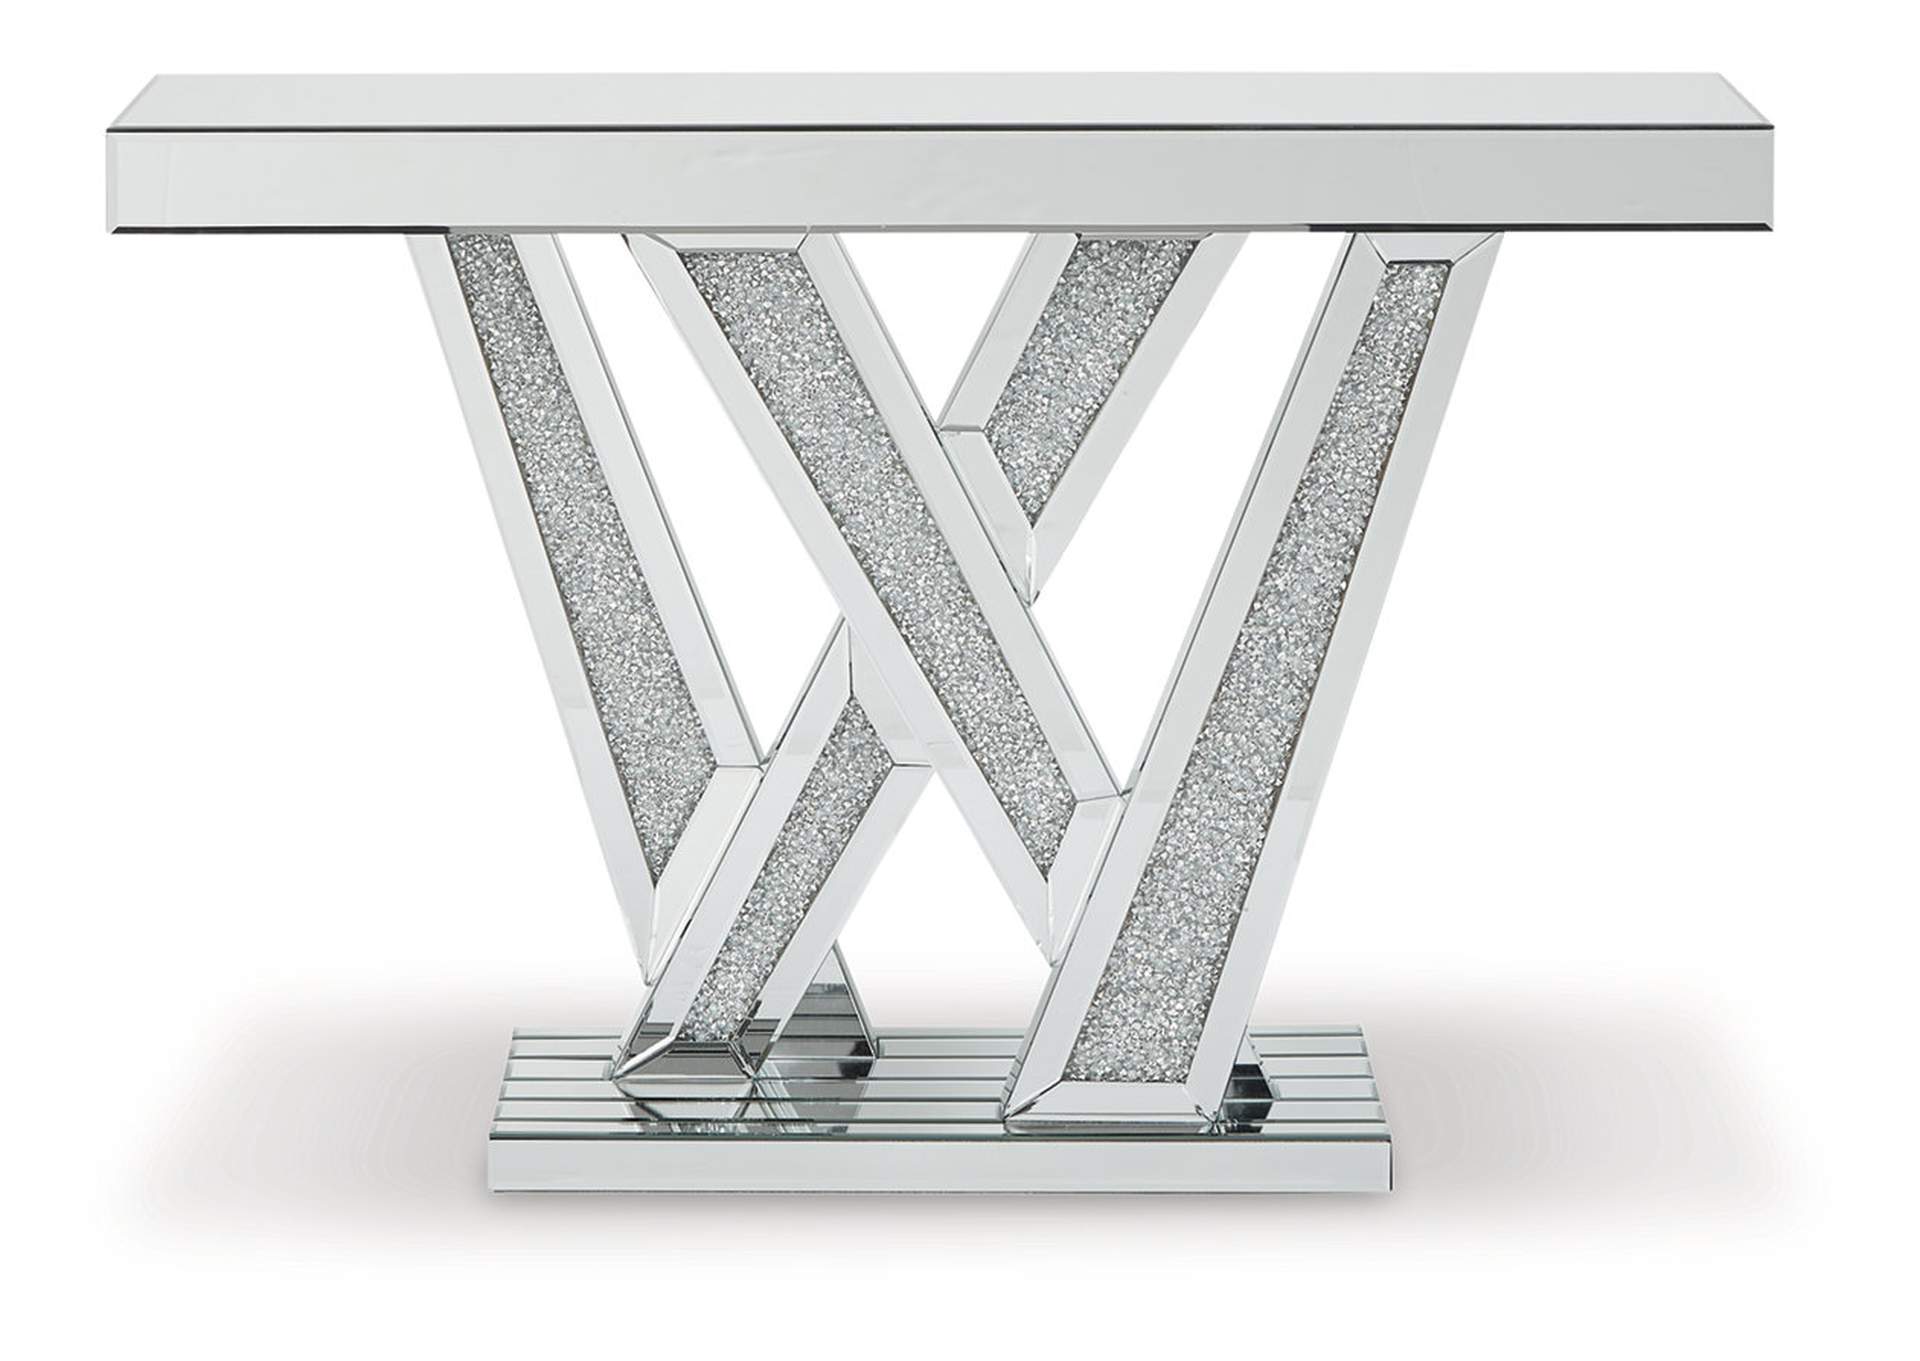 Gillrock Console Table,Signature Design By Ashley